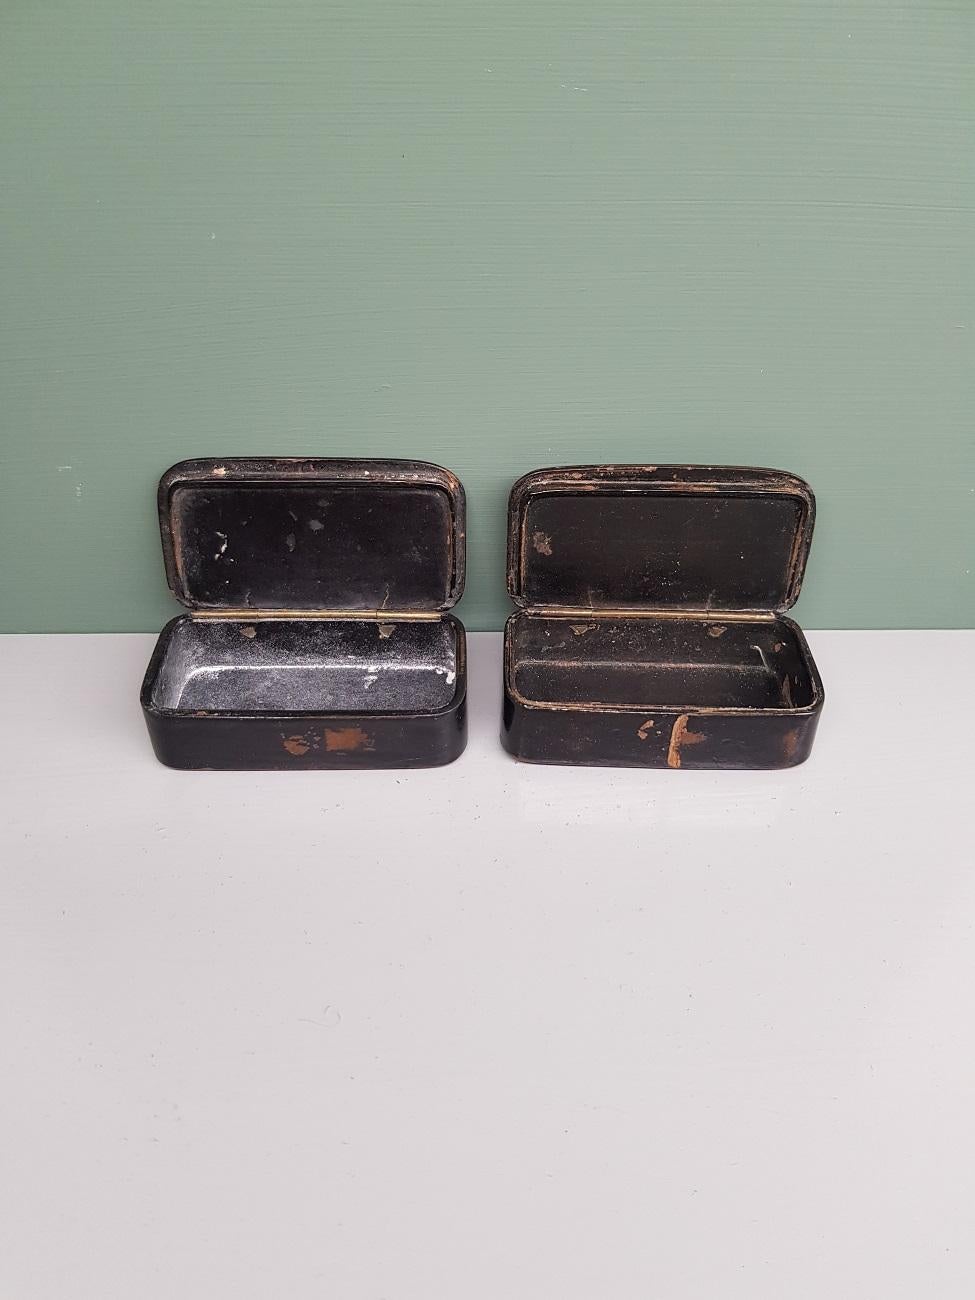 19th Century Black Lacquered Wooden Snuff Boxes Inlaid with Mother of Pearl In Good Condition For Sale In Raalte, NL